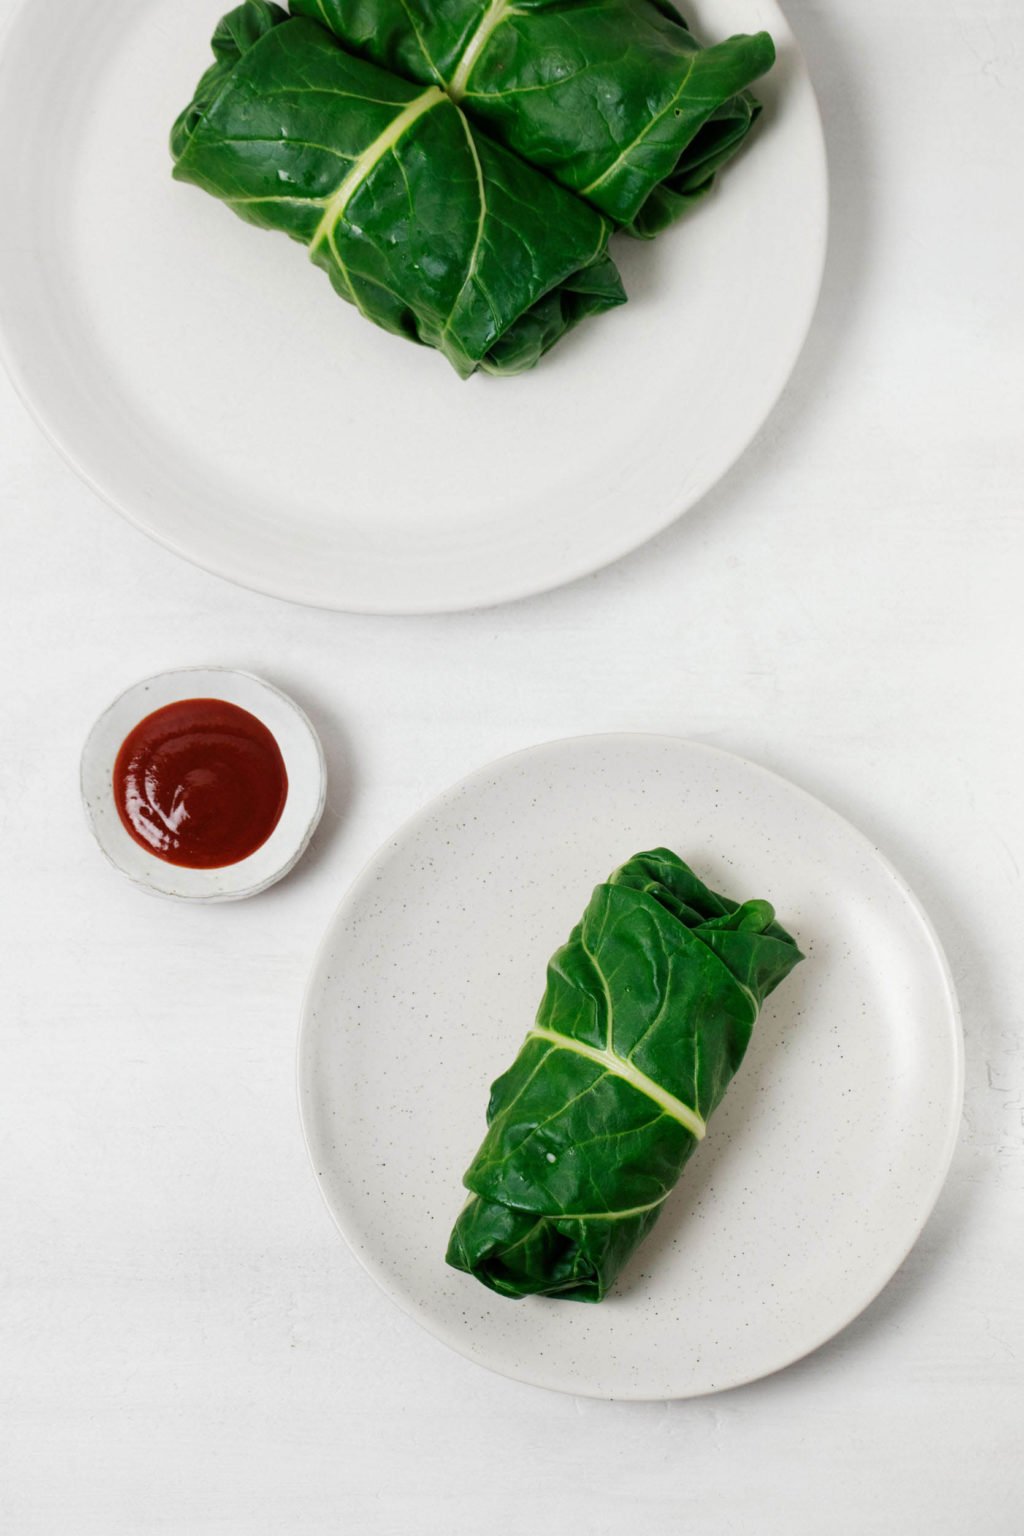 Leafy greens have been stuffed with whole grains and legumes. They're served on small white plates with barbecue sauce nearby.